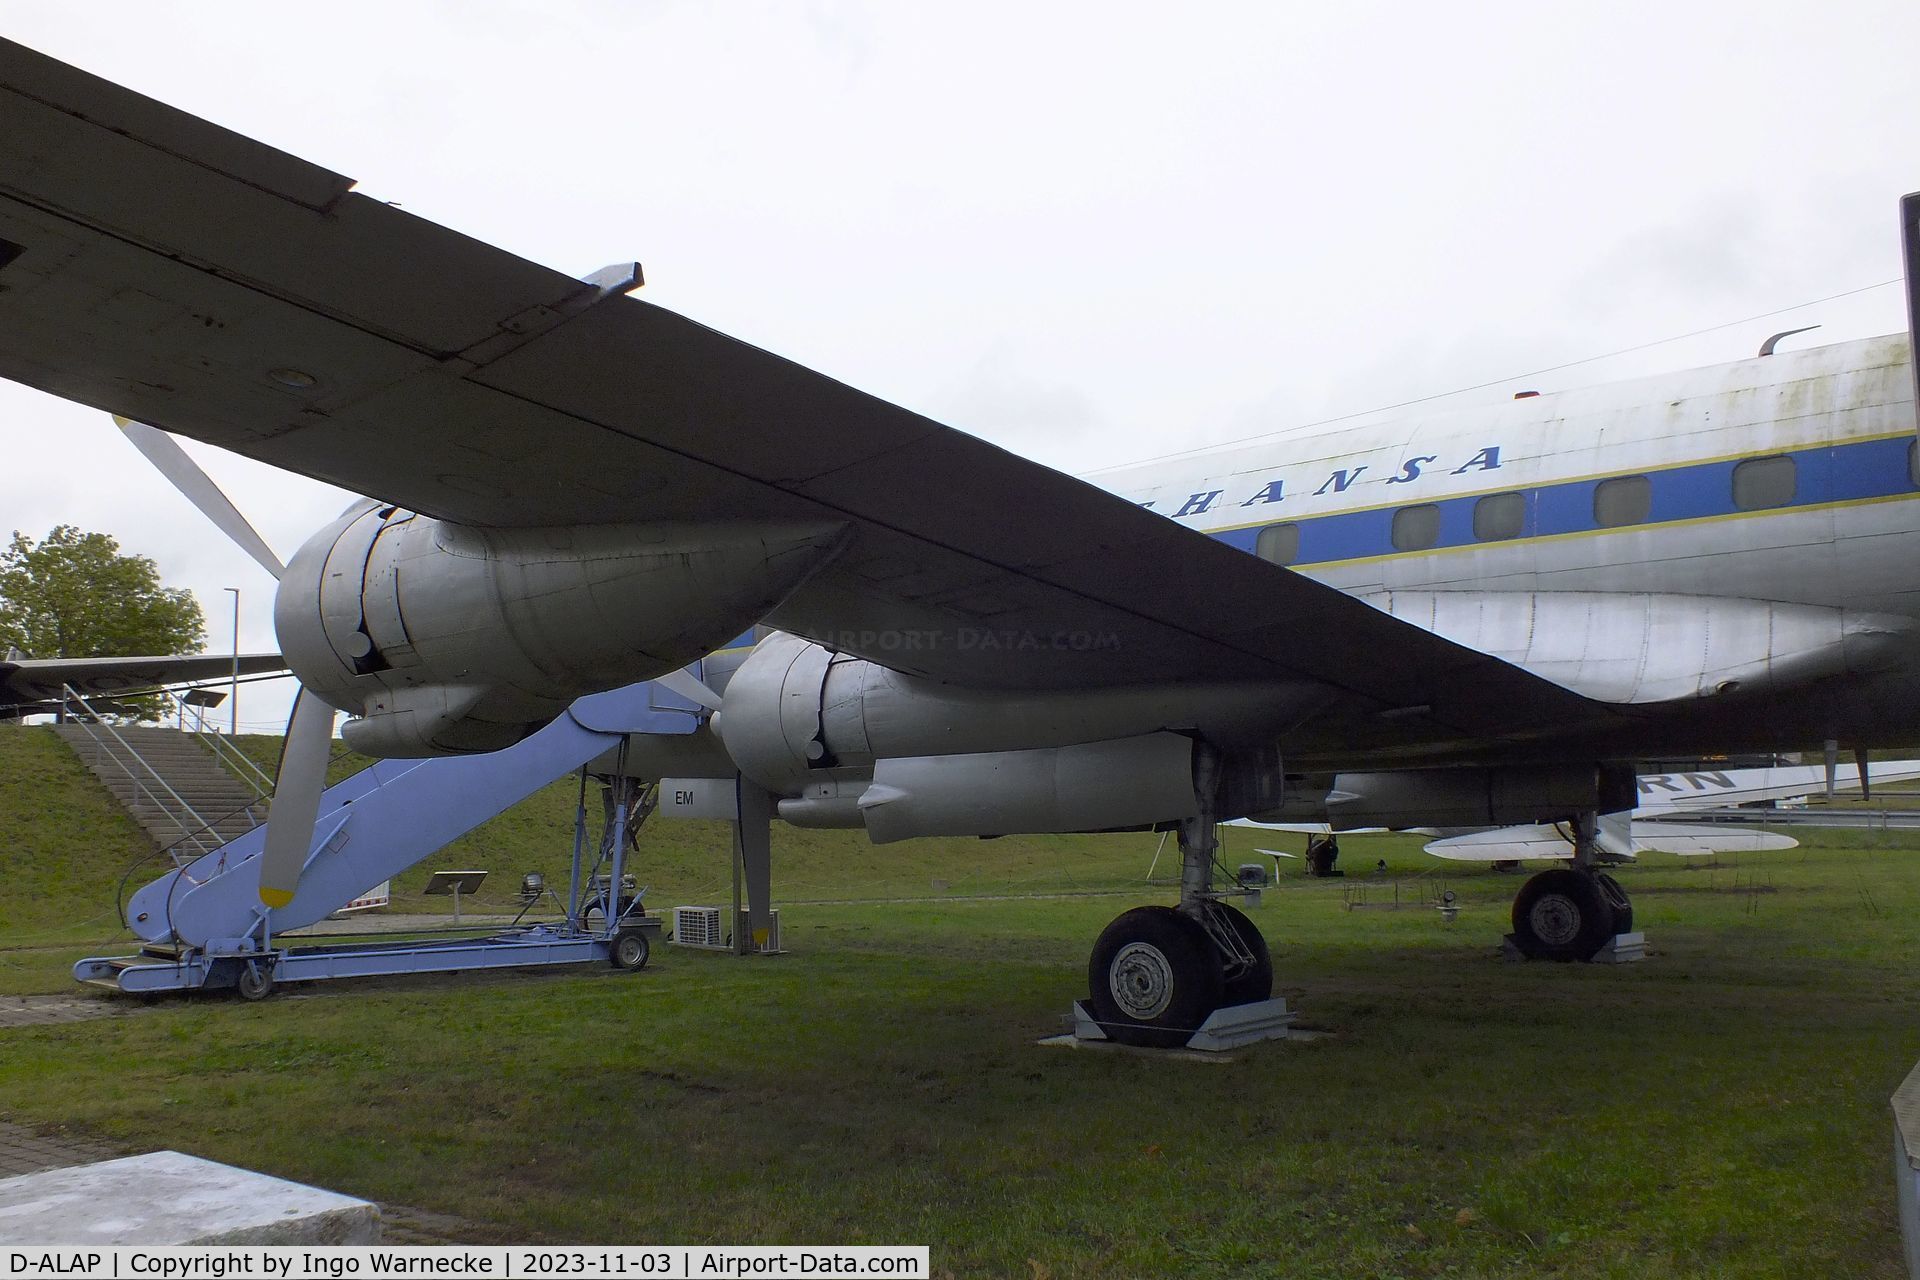 D-ALAP, 1957 Lockheed L-1049G Super Constellation C/N 4671, Lockheed L-1049G Super Constellation, displayed to represent 'D-ALEM', the plane that made the first intercontinental flight of the new Lufthansa in 1955, at the visitors park of Munich international airport (Besucherpark)